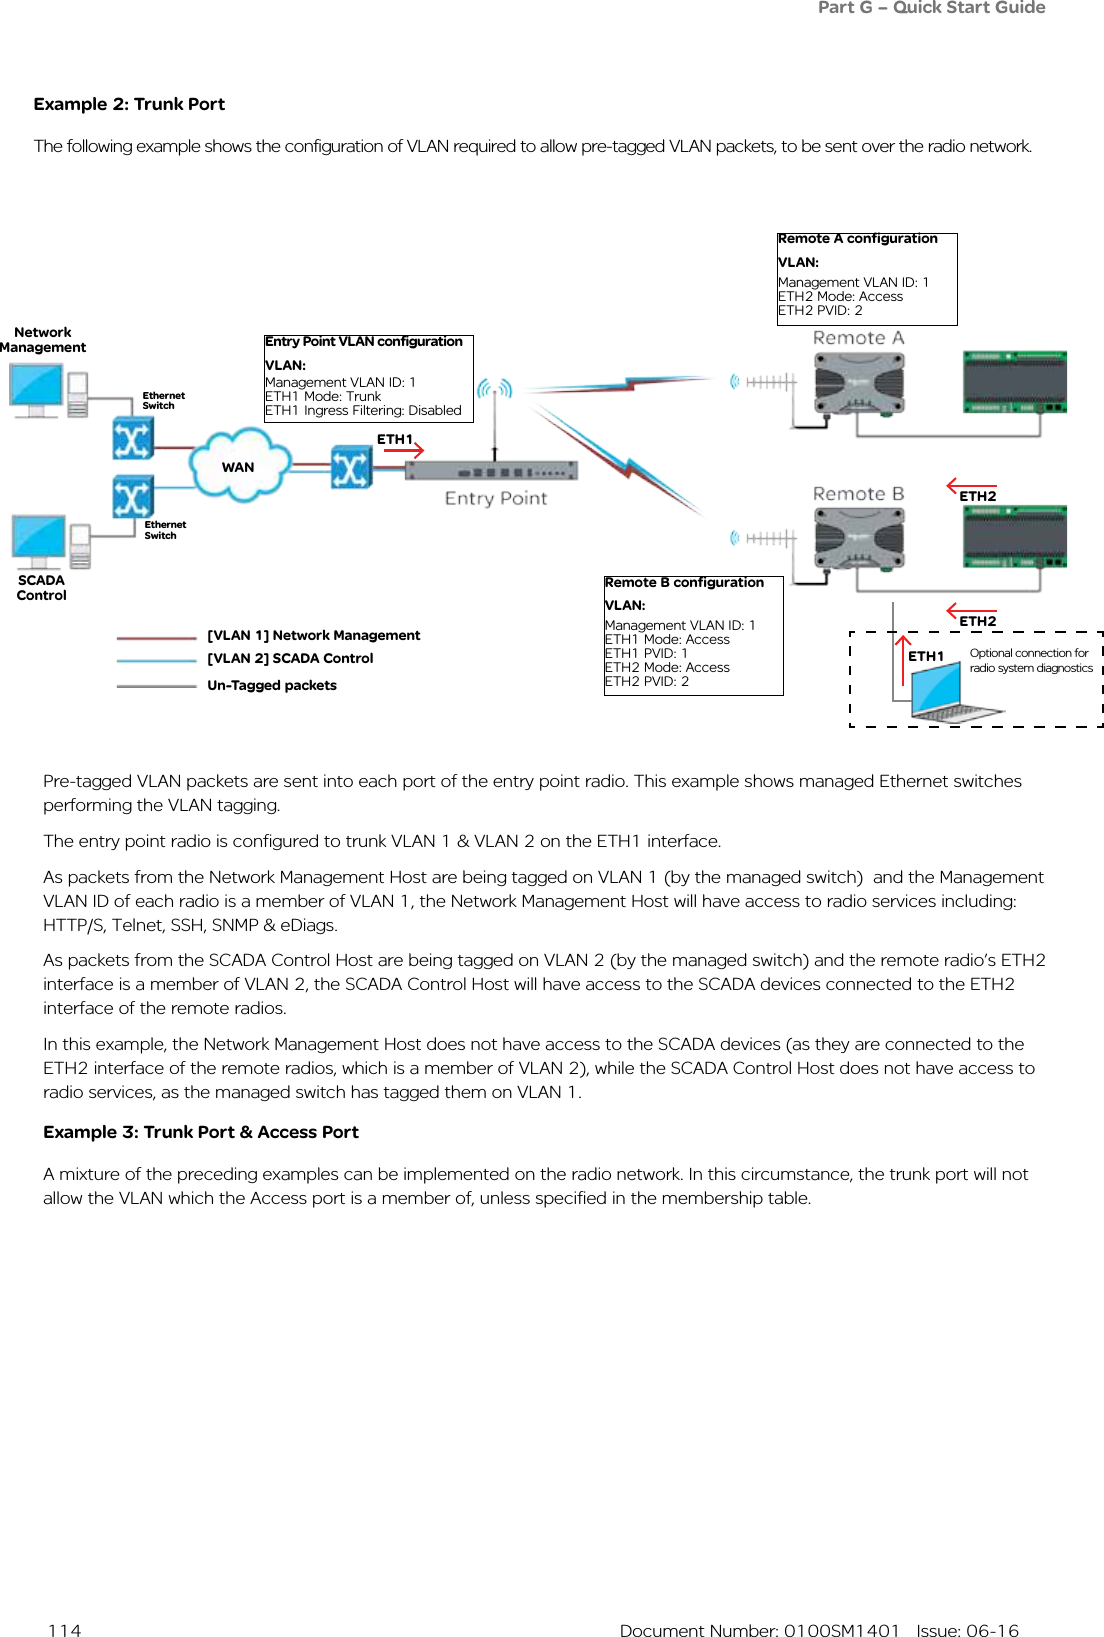  114  Document Number: 0100SM1401   Issue: 06-16Example 2: Trunk PortThe following example shows the configuration of VLAN required to allow pre-tagged VLAN packets, to be sent over the radio network.Part G – Quick Start Guide[VLAN 1] Network Management[VLAN 2] SCADA ControlUn-Tagged packetsETH1Network ManagementSCADA ControlETH2ETH2Ethernet SwitchWANEthernet SwitchEntry Point VLAN configurationVLAN:Management VLAN ID: 1ETH1 Mode: TrunkETH1 Ingress Filtering: DisabledETH1 Optional connection for radio system diagnosticsPre-tagged VLAN packets are sent into each port of the entry point radio. This example shows managed Ethernet switches performing the VLAN tagging.The entry point radio is configured to trunk VLAN 1 &amp; VLAN 2 on the ETH1 interface.As packets from the Network Management Host are being tagged on VLAN 1 (by the managed switch)  and the Management VLAN ID of each radio is a member of VLAN 1, the Network Management Host will have access to radio services including: HTTP/S, Telnet, SSH, SNMP &amp; eDiags. As packets from the SCADA Control Host are being tagged on VLAN 2 (by the managed switch) and the remote radio’s ETH2 interface is a member of VLAN 2, the SCADA Control Host will have access to the SCADA devices connected to the ETH2 interface of the remote radios.In this example, the Network Management Host does not have access to the SCADA devices (as they are connected to the ETH2 interface of the remote radios, which is a member of VLAN 2), while the SCADA Control Host does not have access to radio services, as the managed switch has tagged them on VLAN 1.Example 3: Trunk Port &amp; Access PortA mixture of the preceding examples can be implemented on the radio network. In this circumstance, the trunk port will not allow the VLAN which the Access port is a member of, unless specified in the membership table.Remote A configurationVLAN:Management VLAN ID: 1ETH2 Mode: AccessETH2 PVID: 2Remote B configurationVLAN:Management VLAN ID: 1ETH1 Mode: AccessETH1 PVID: 1ETH2 Mode: AccessETH2 PVID: 2